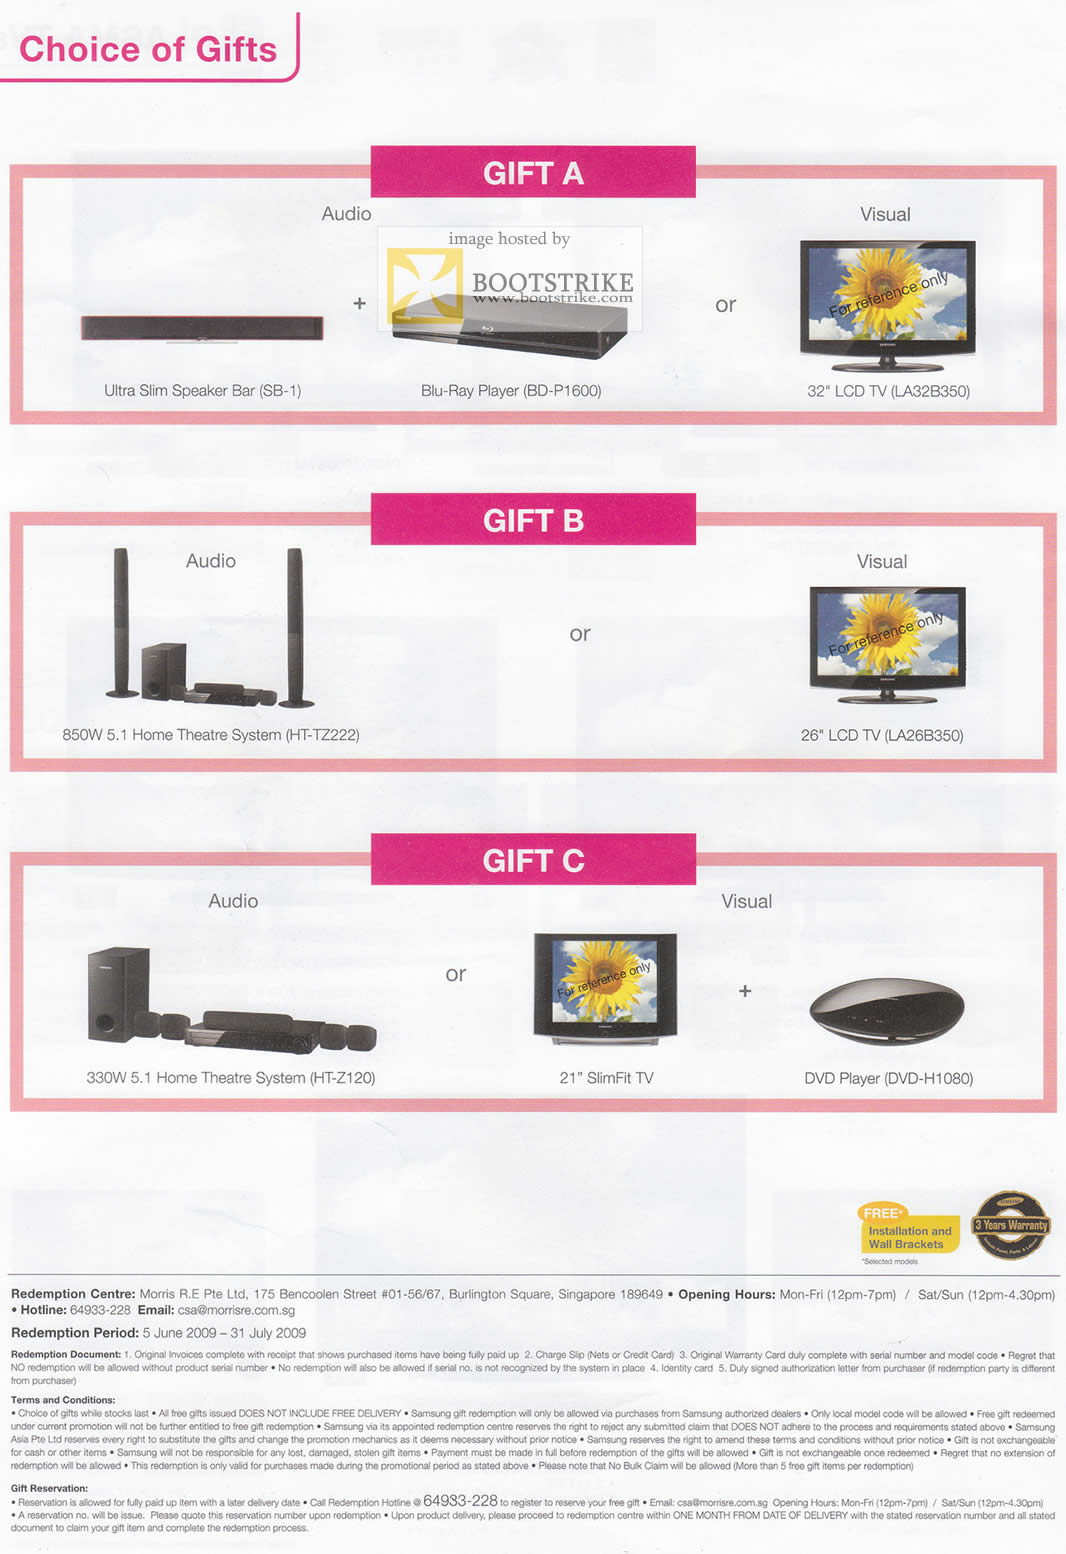 PC Show 2009 price list image brochure of Samsung LCD Plasma TVs Choice Of Gifts